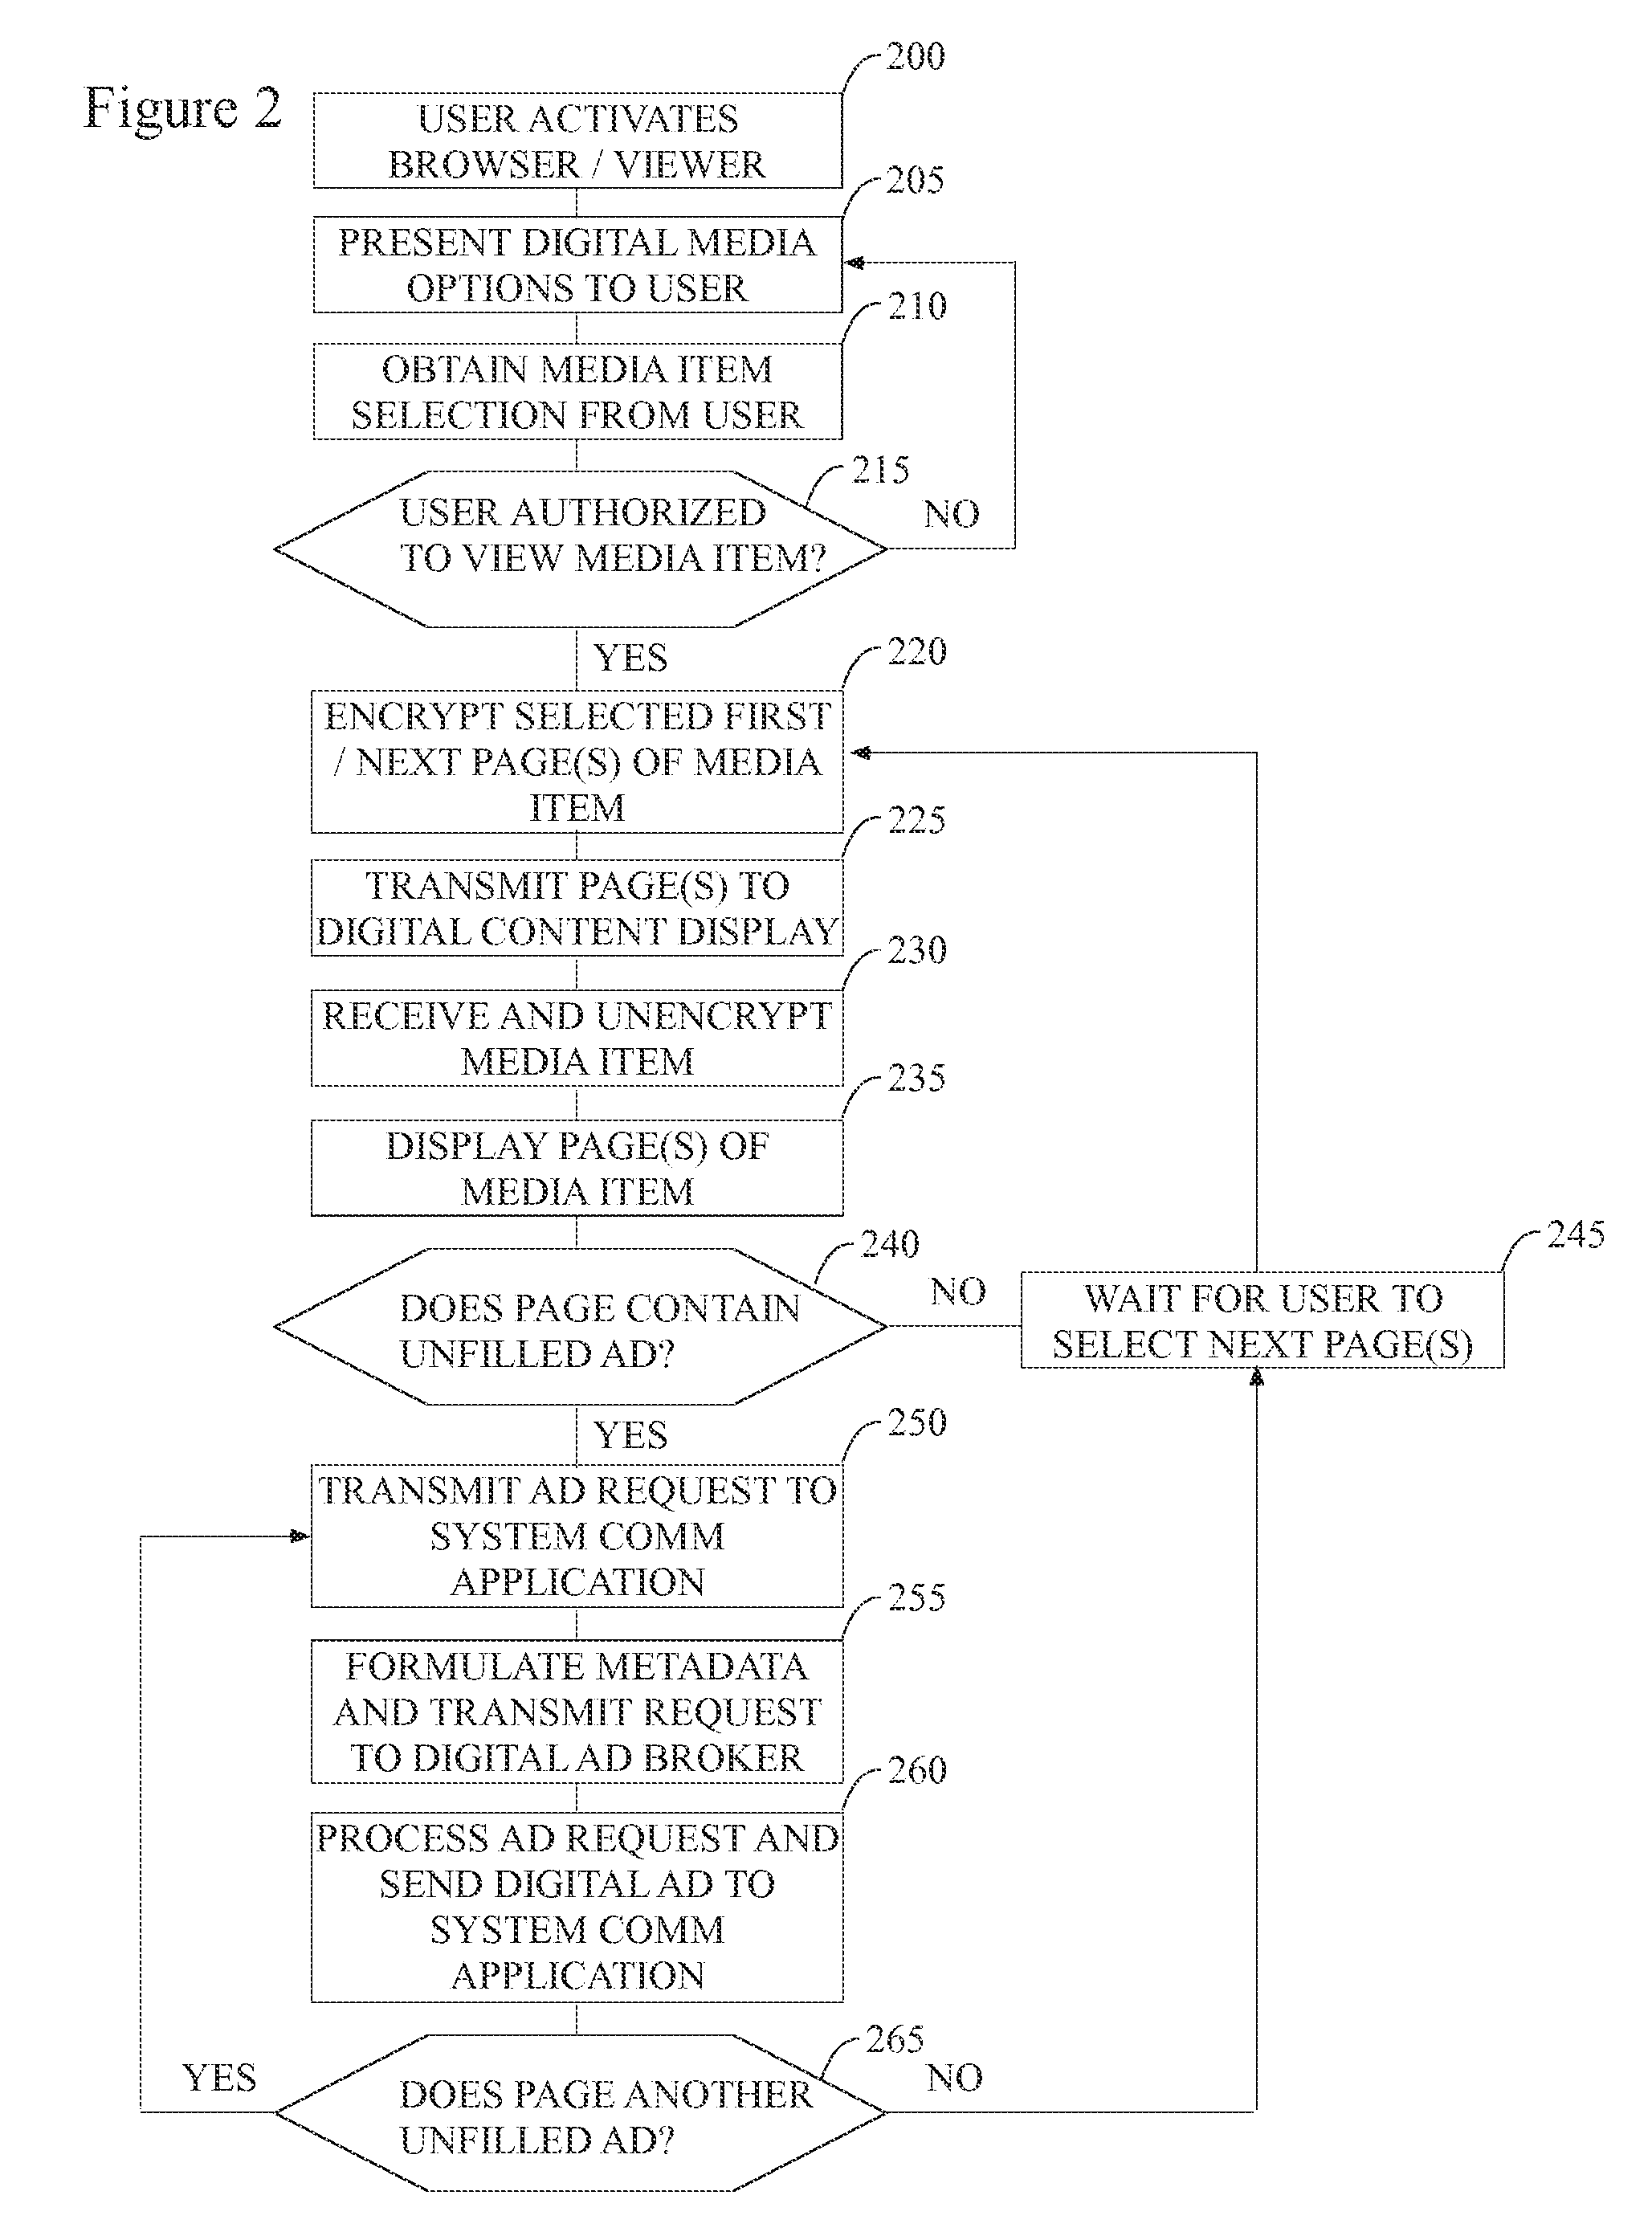 Method and apparatus for system communications application between digital magazines, catalogs, and/or books and digital advertising brokers